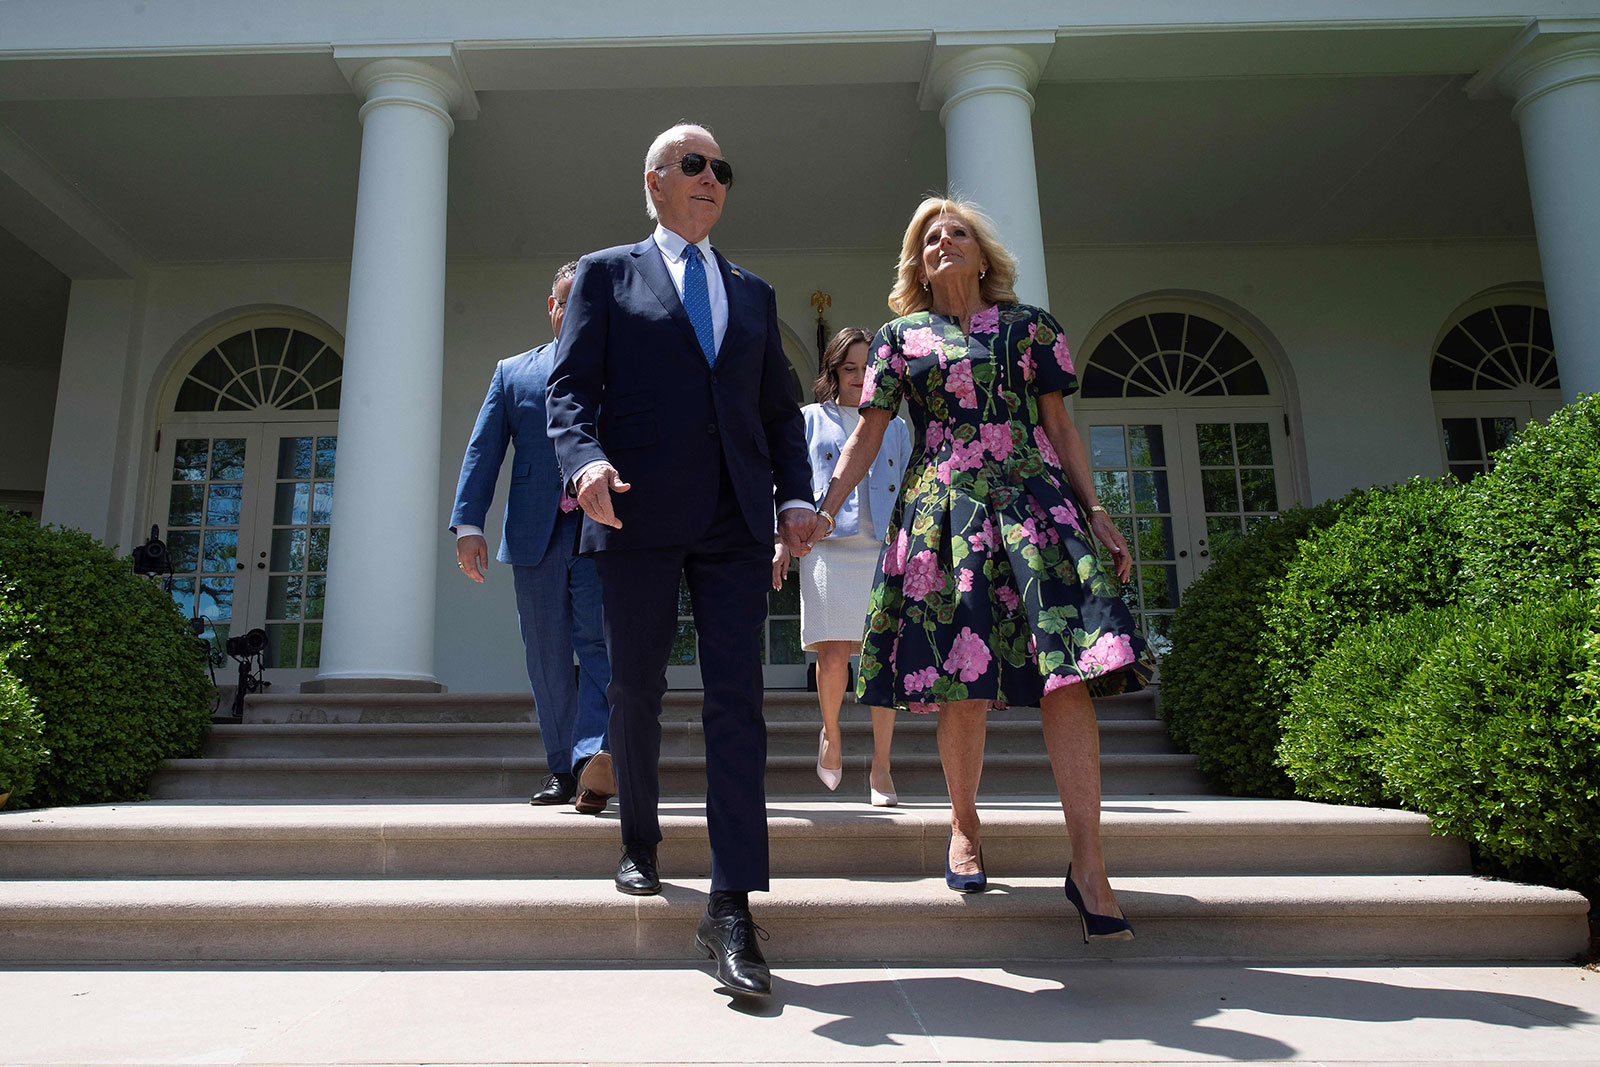 US President Joe Biden and First Lady Jill Biden arrive to speak at a ceremony at the White House in Washington, DC, on April 24.